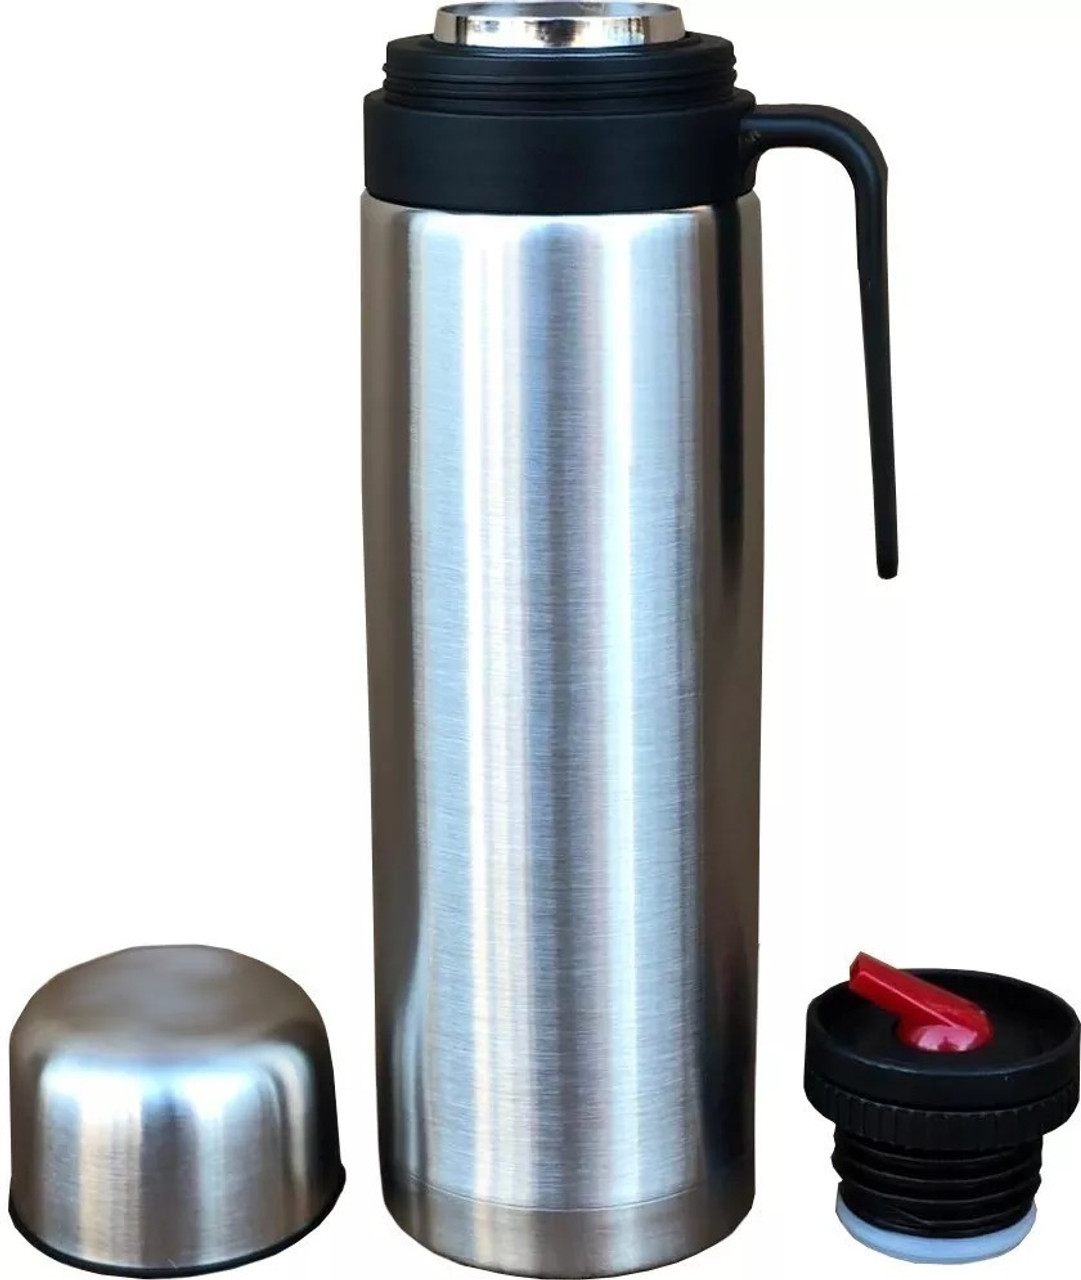 Mates & Yerba Mate :: Thermos :: R-Evolution Termo Cebador 100% Acero  Inoxidable con Pico Cebador Unbreakable Stainless Steel Thermos Vacuum  Bottle with Pouring Beak for Mate 1 l / 33.8 fl oz